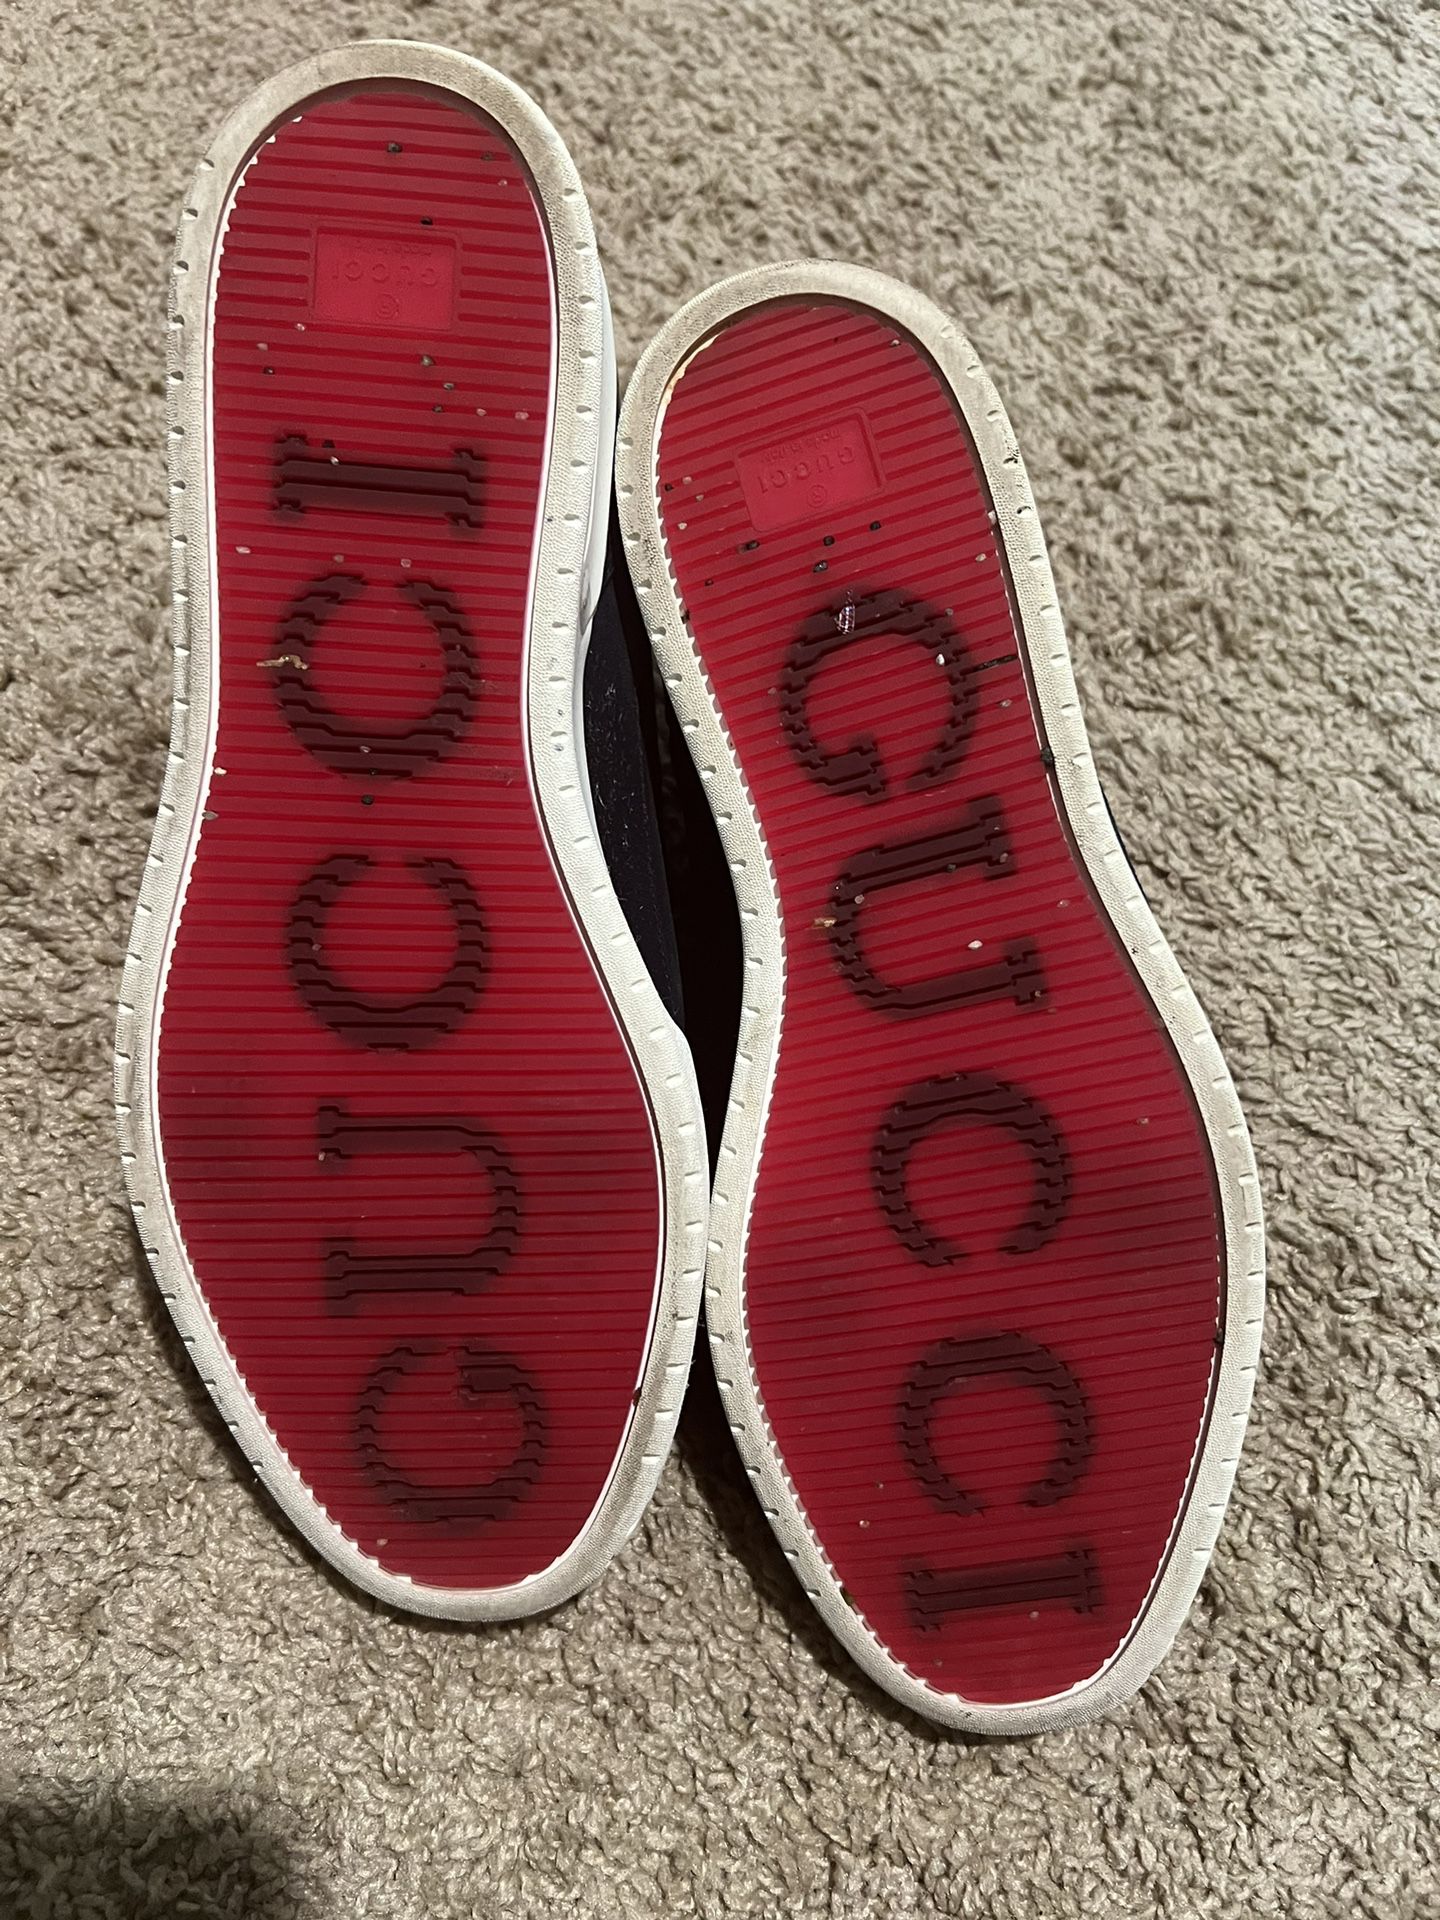 Men’s Gucci Red Bottom Sneakers